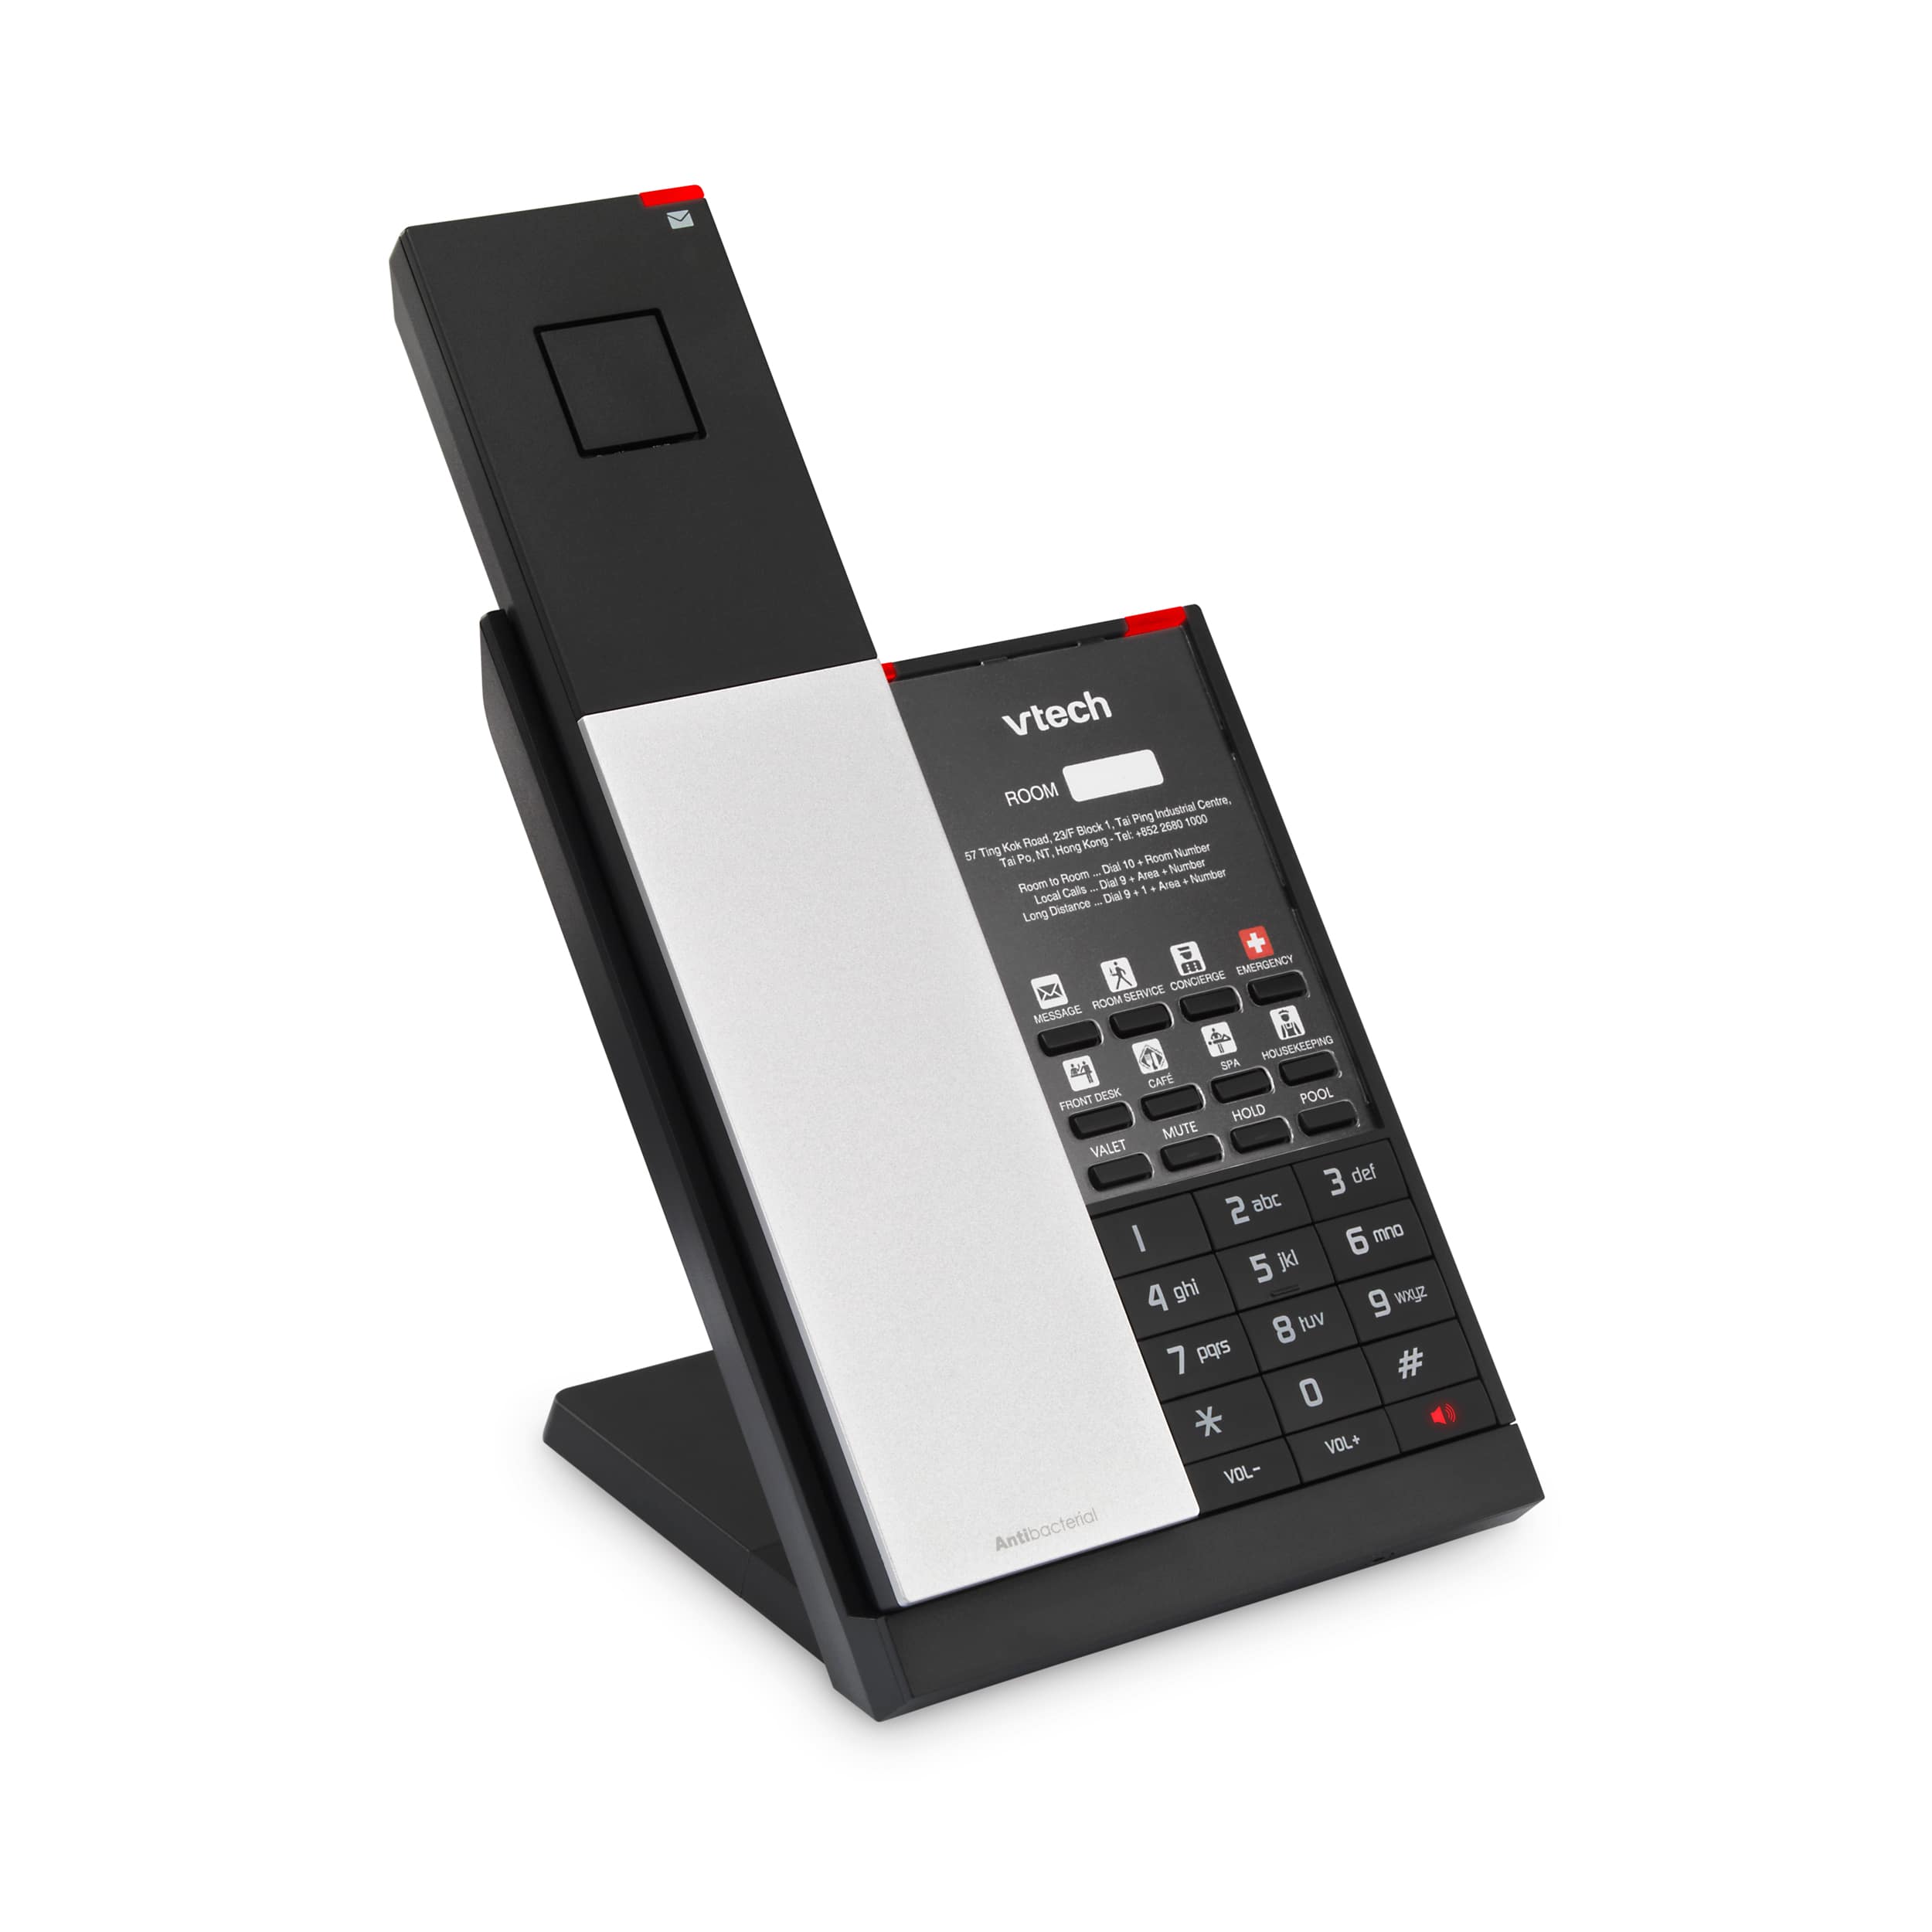 SMART1-SM-HS  Android based DECT Smartphone with WiFi.